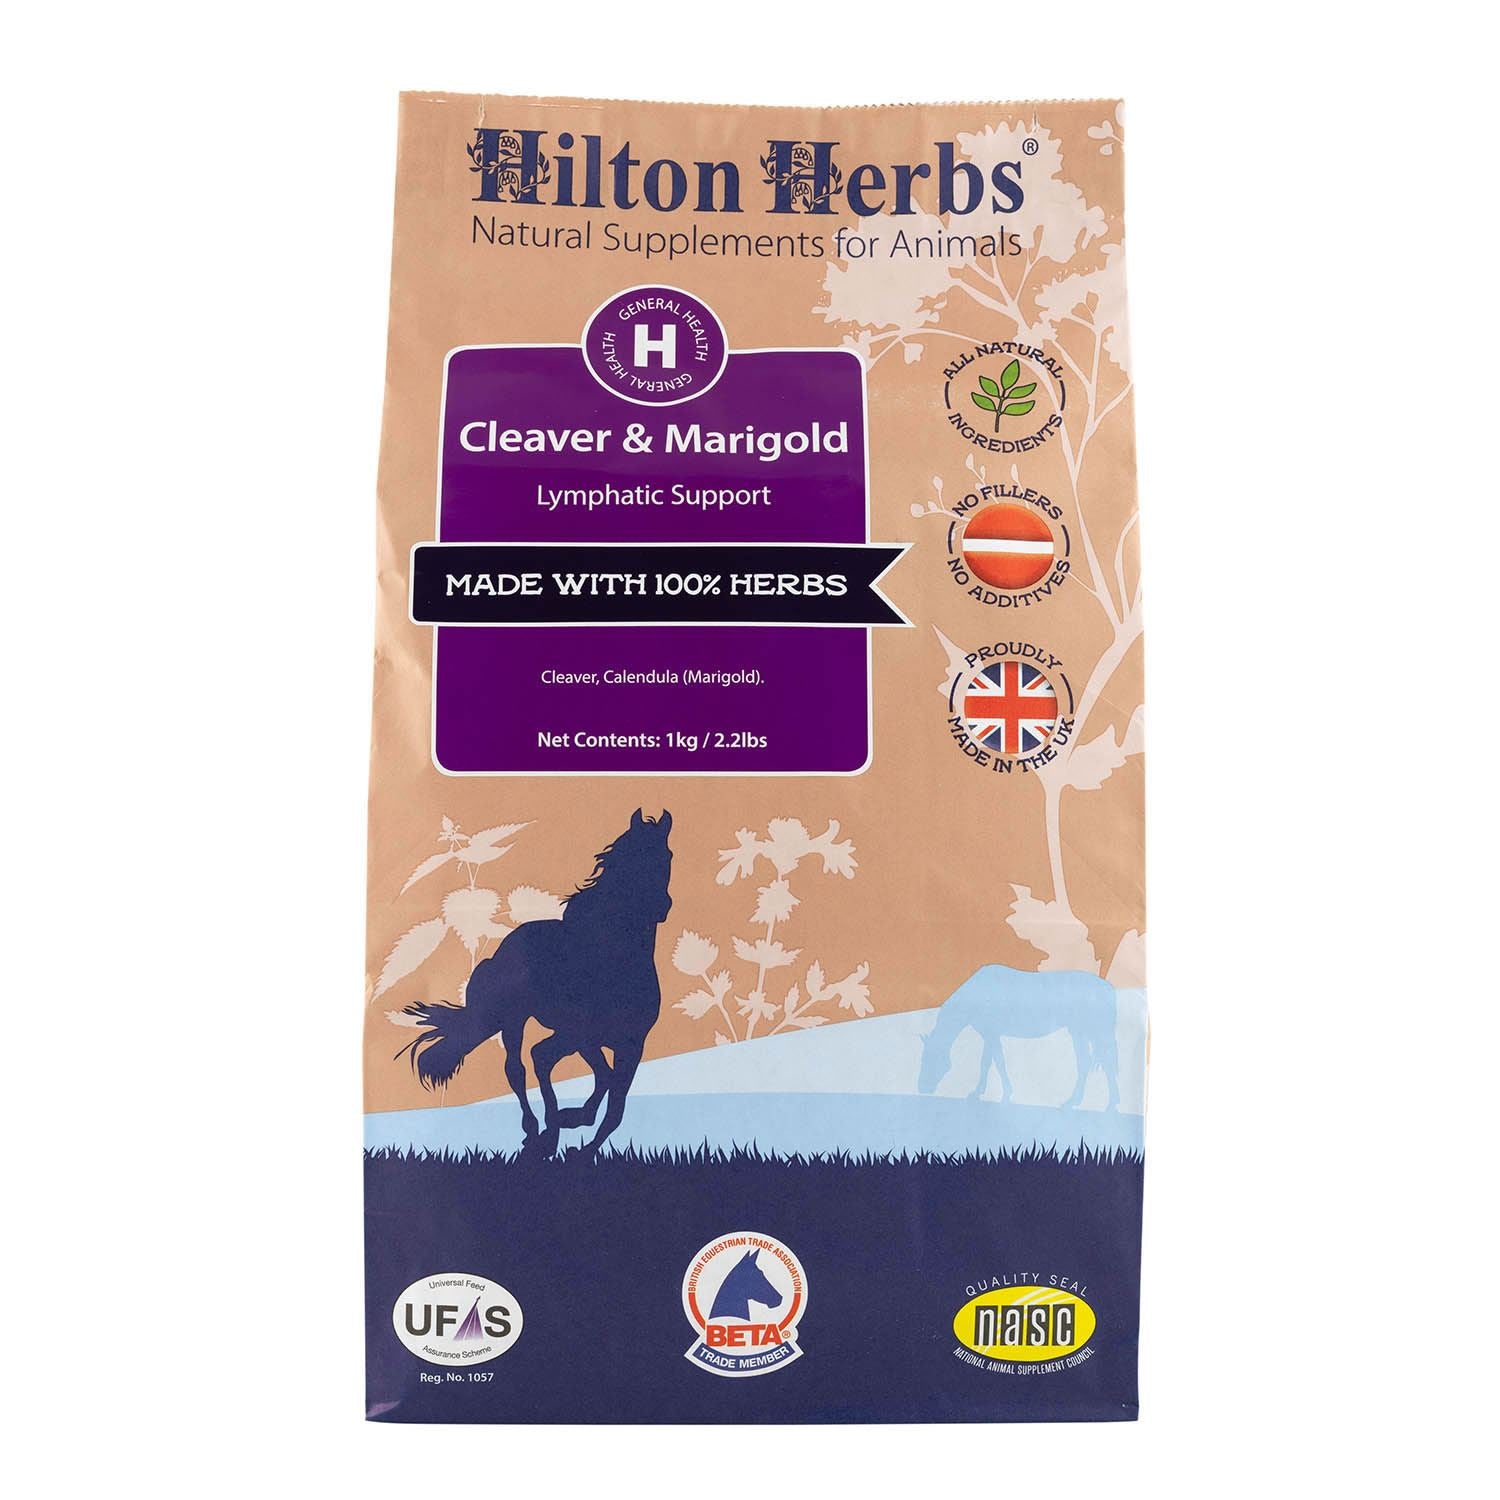 HILTON HERBS CLEAVER & MARIGOLD for lymphatic and glandular support